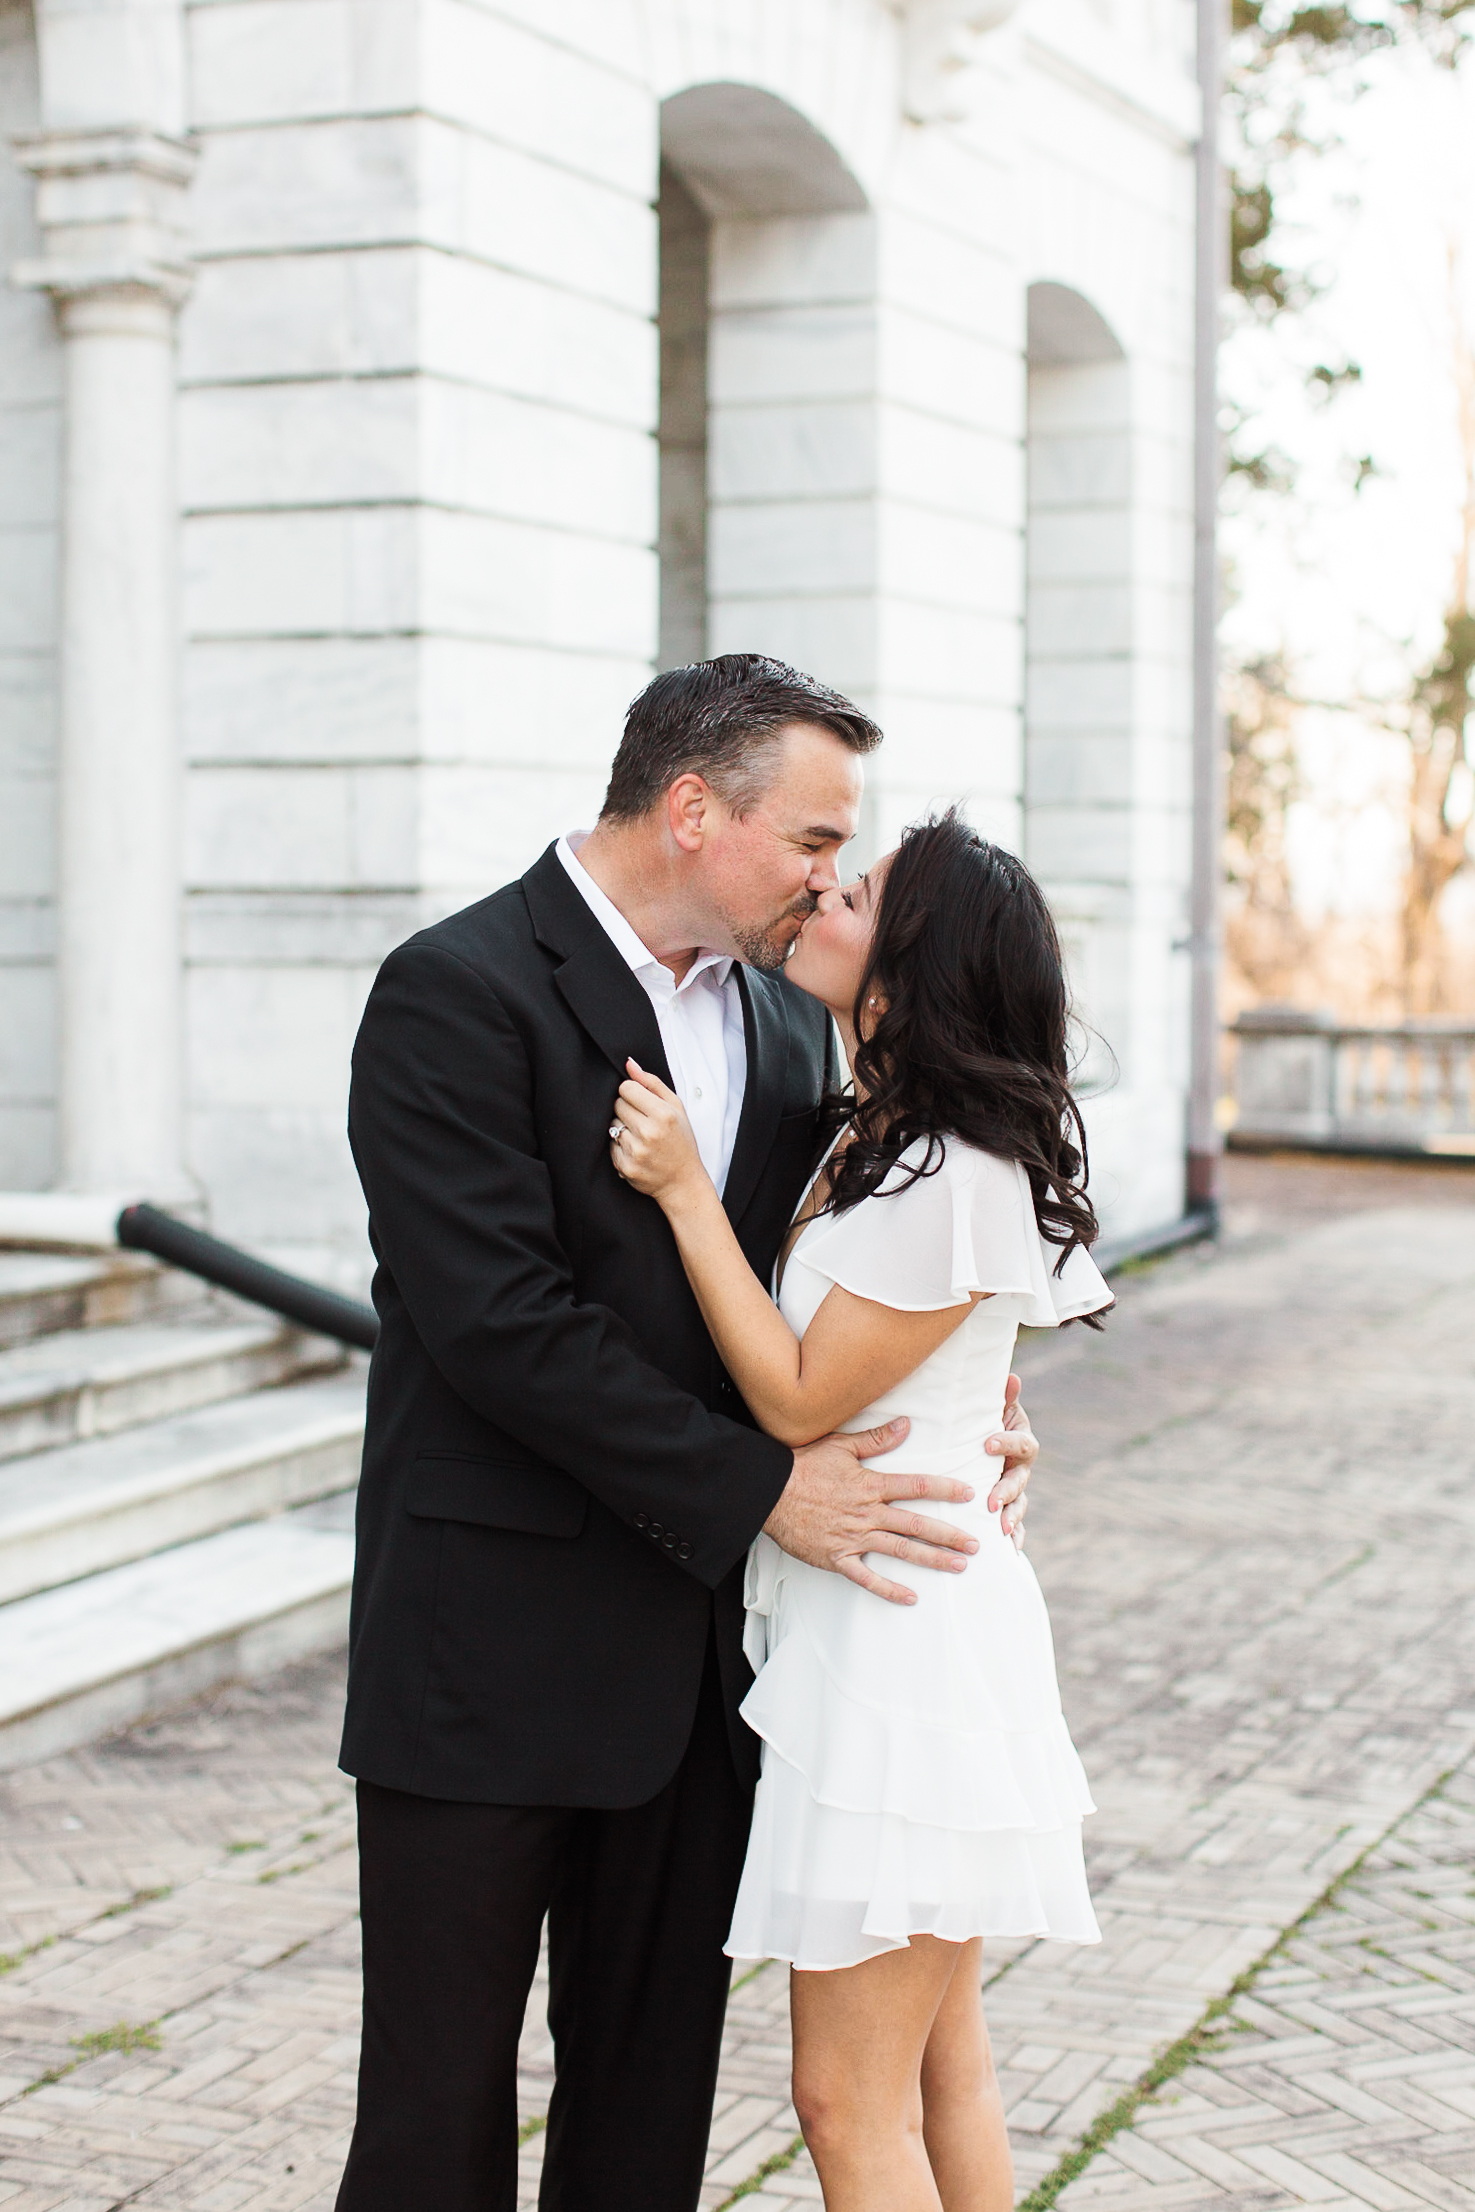 Spring engagement session on the steps of Swannanoa Palace in Afton, VA